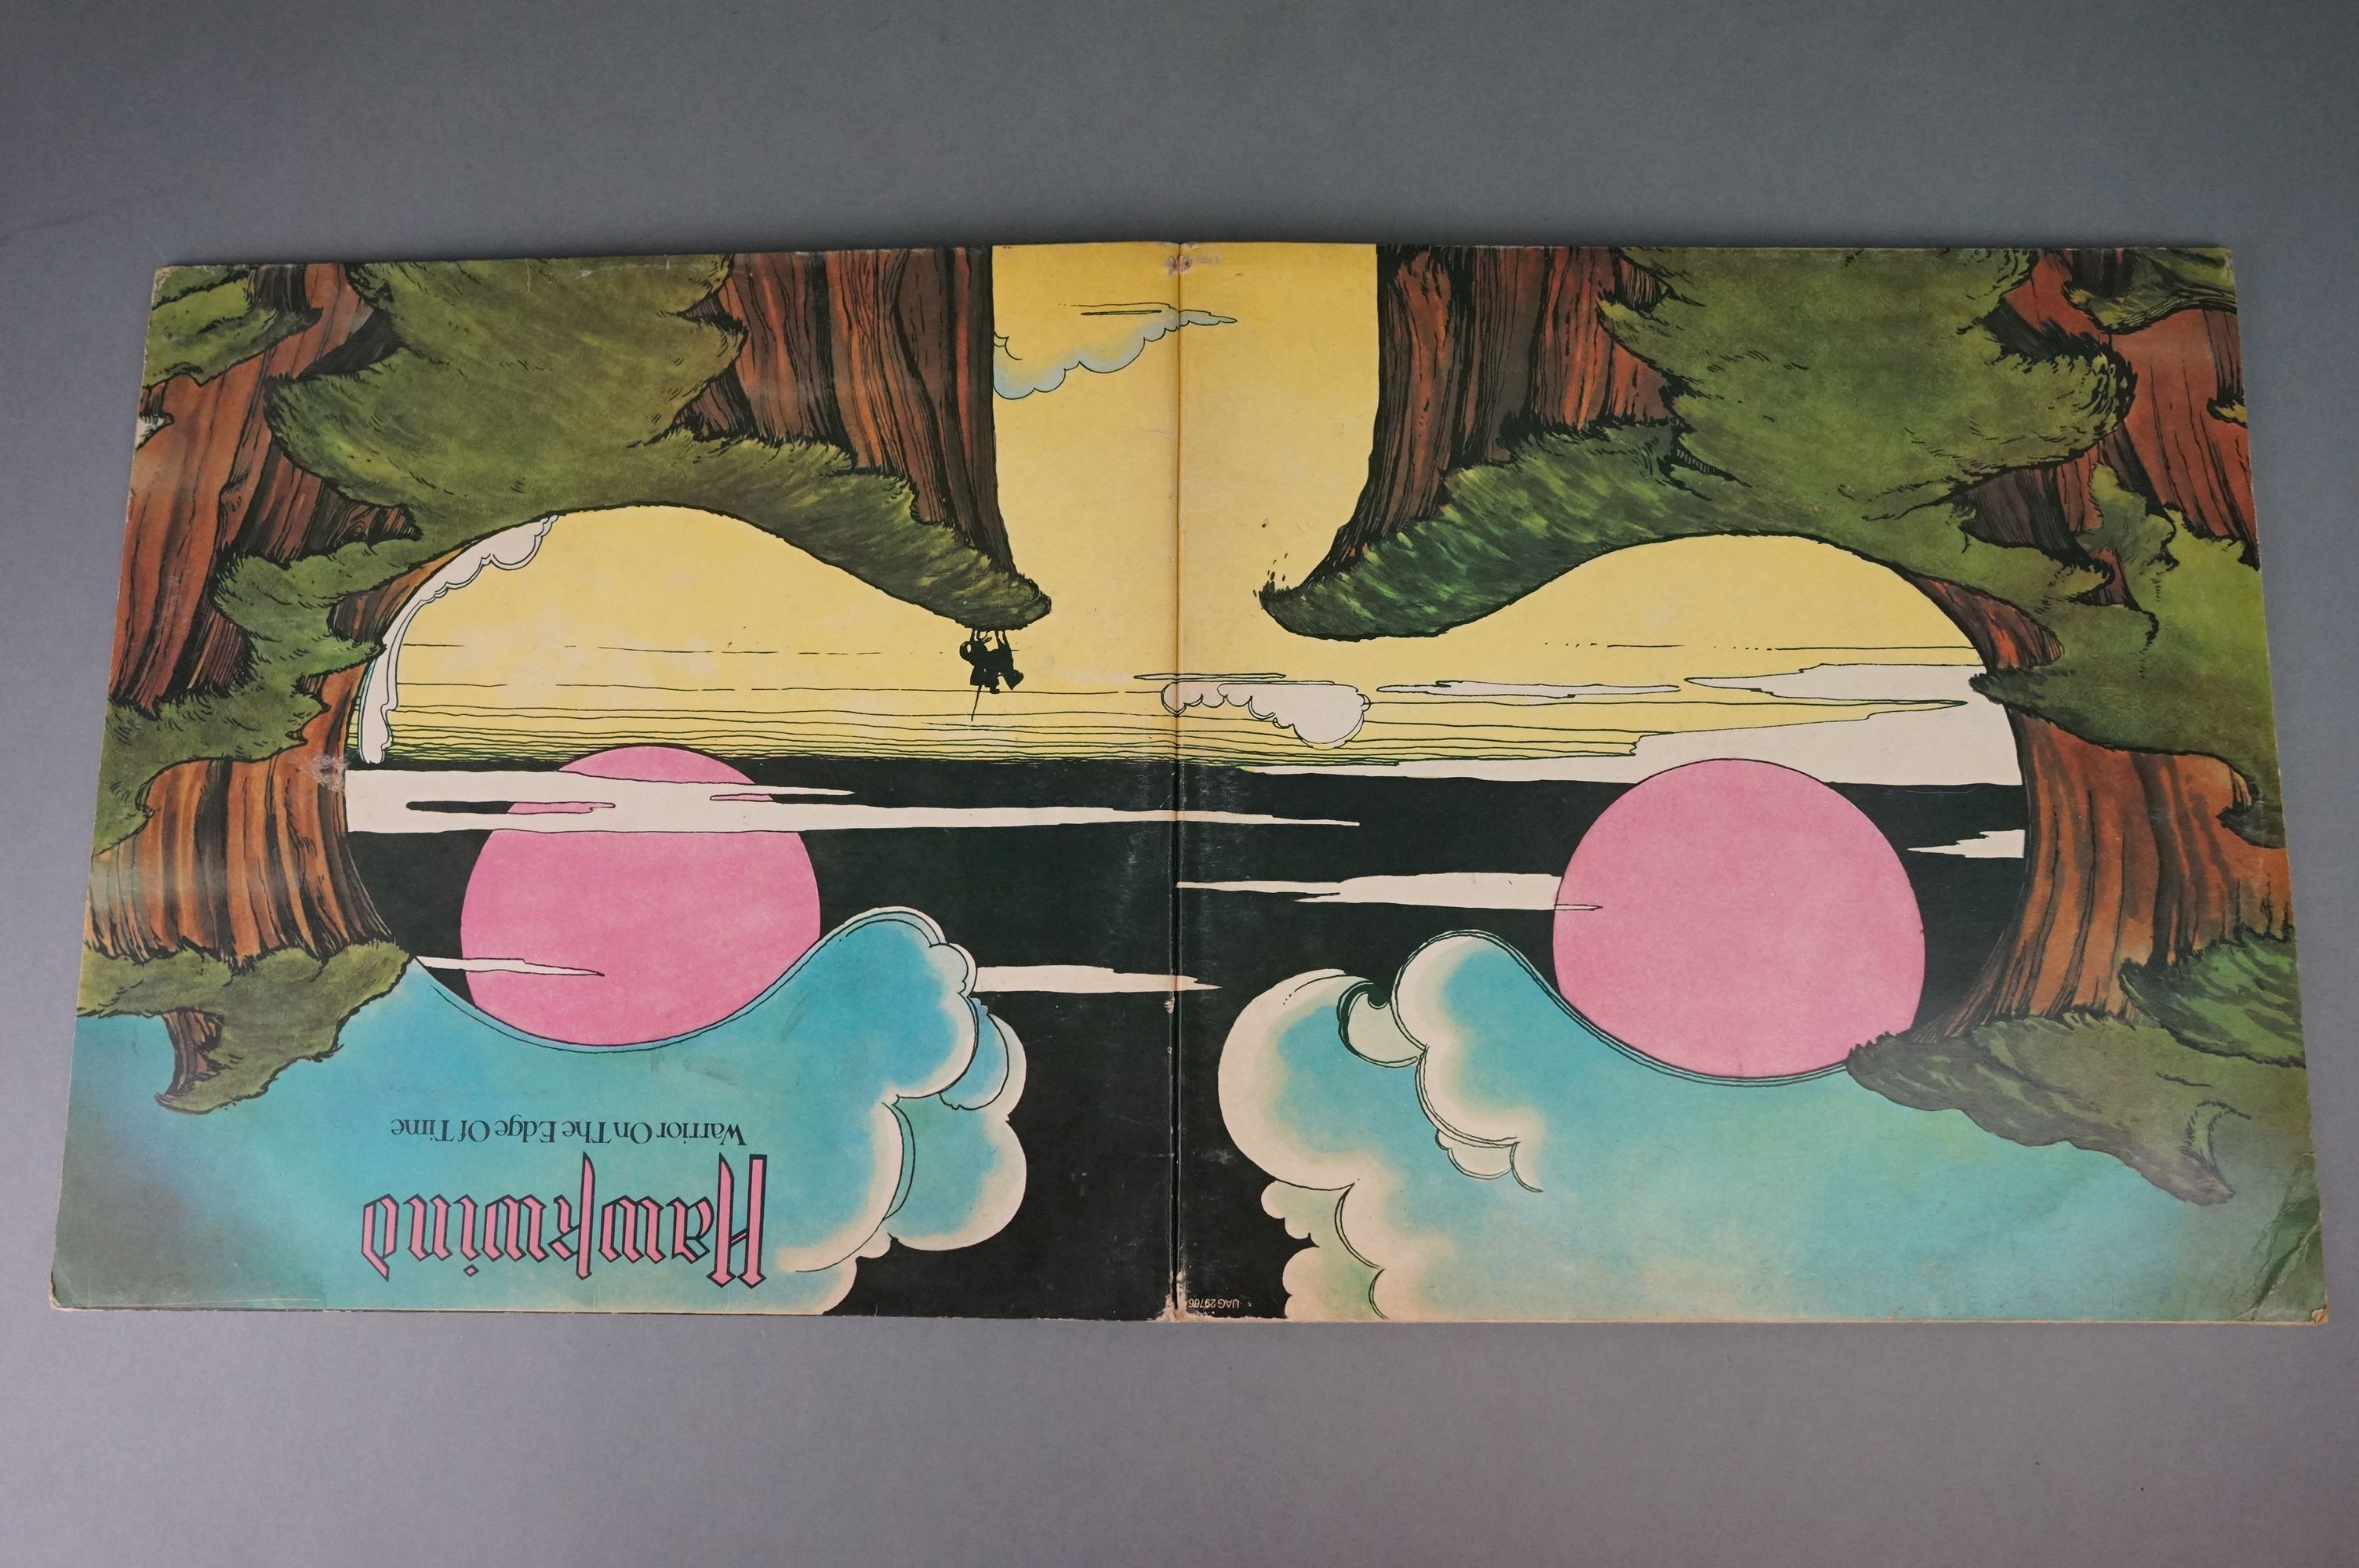 Vinyl - Hawkwind Warrior On The Edge Of Time (UAG 29766) complete with inner, gatefold intact. - Image 4 of 8